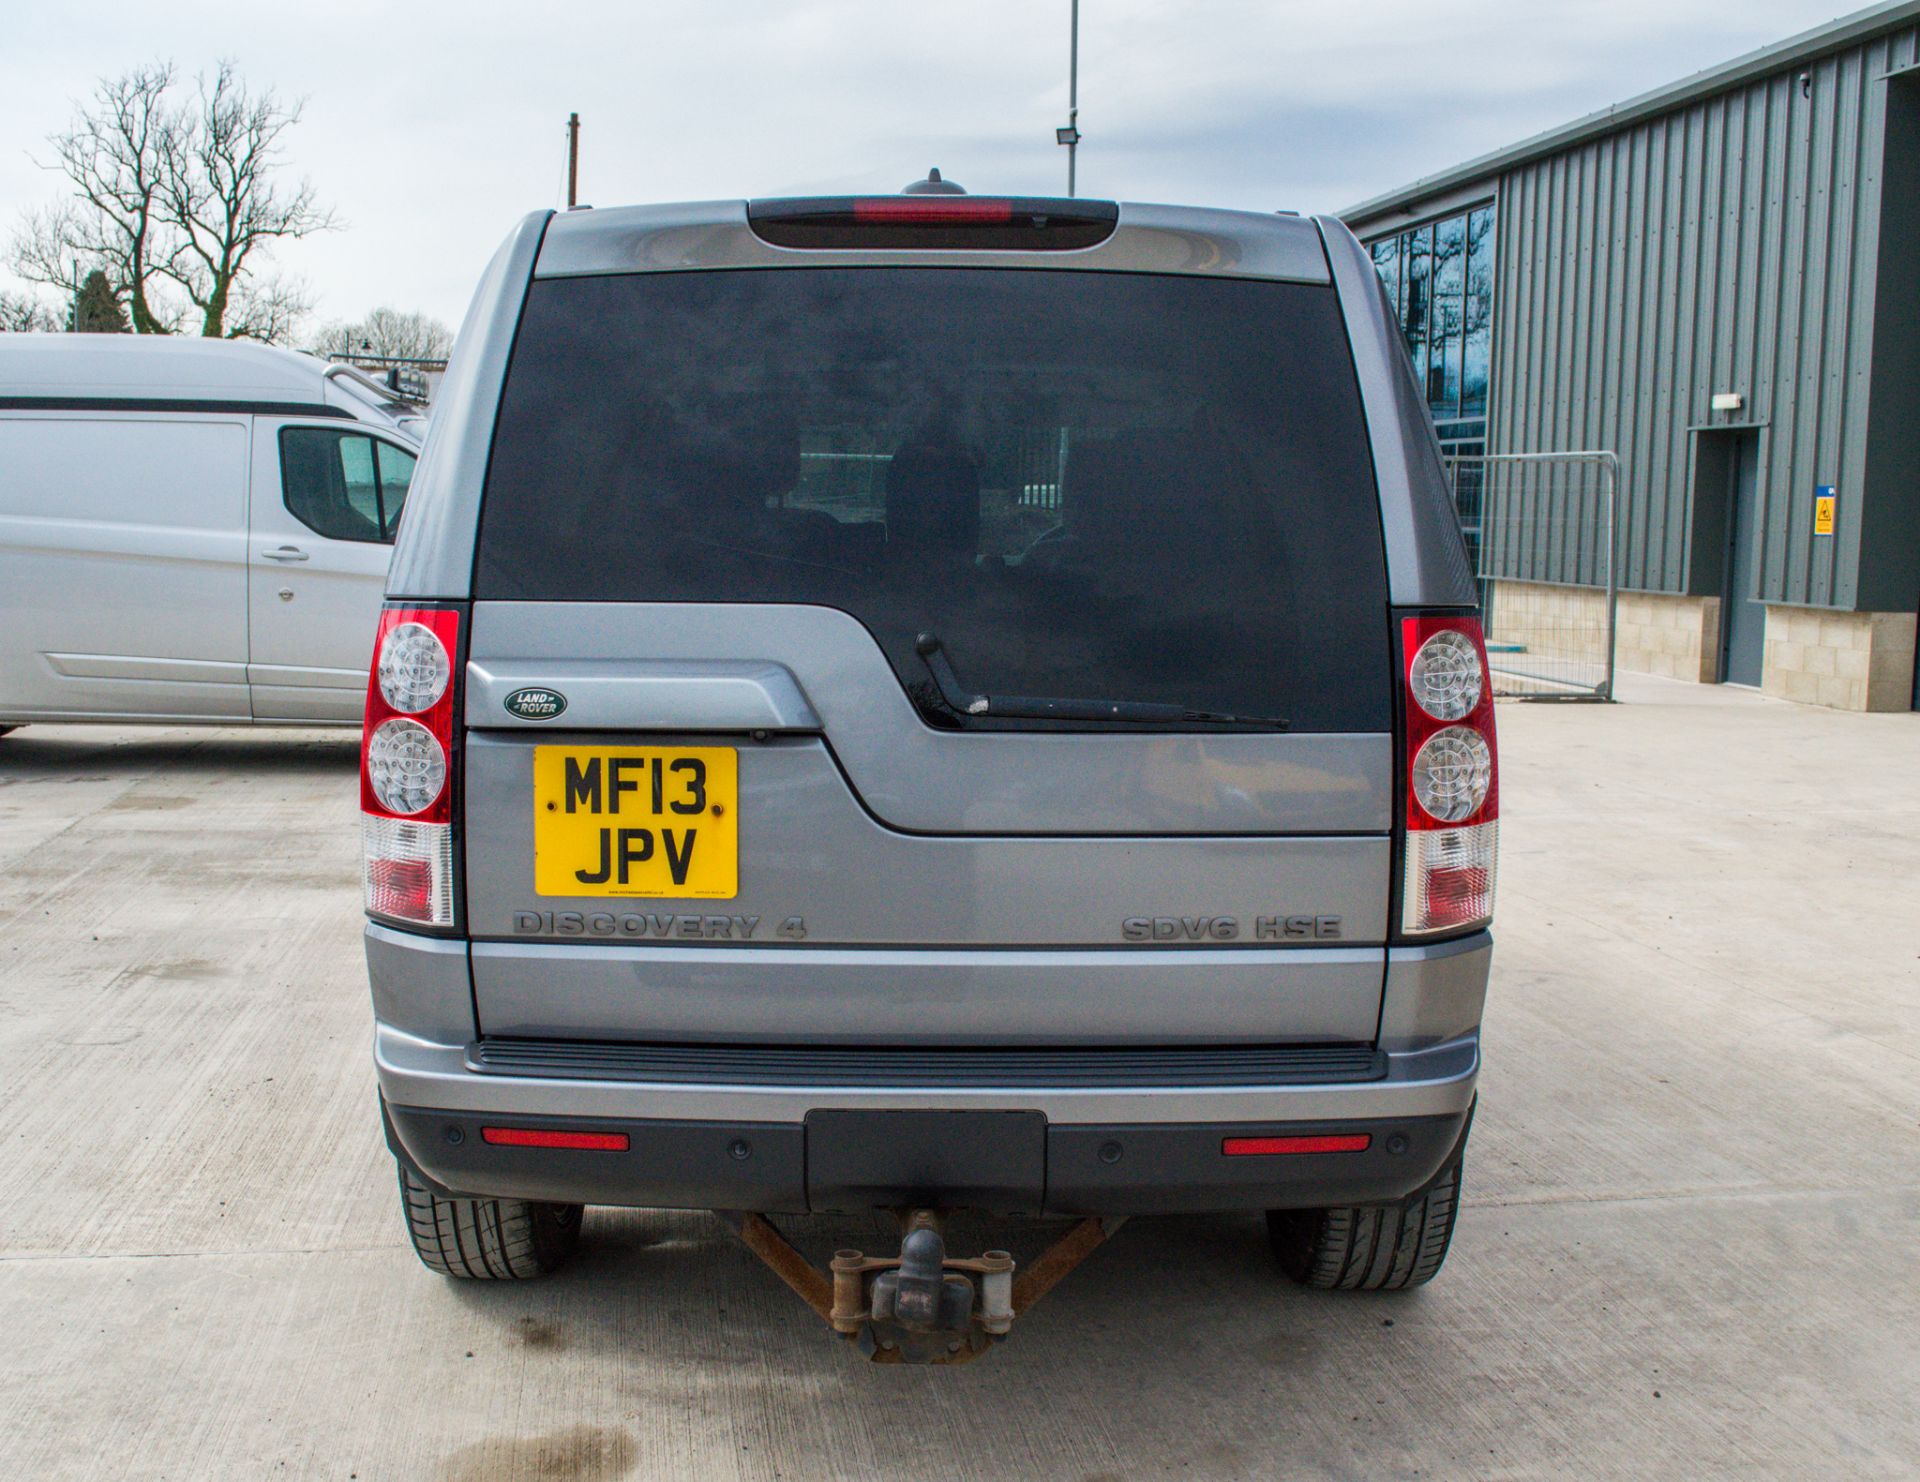 Land Rover Discovery 4 HSE SDV6 3.0 diesel automatic estate car - Image 6 of 32